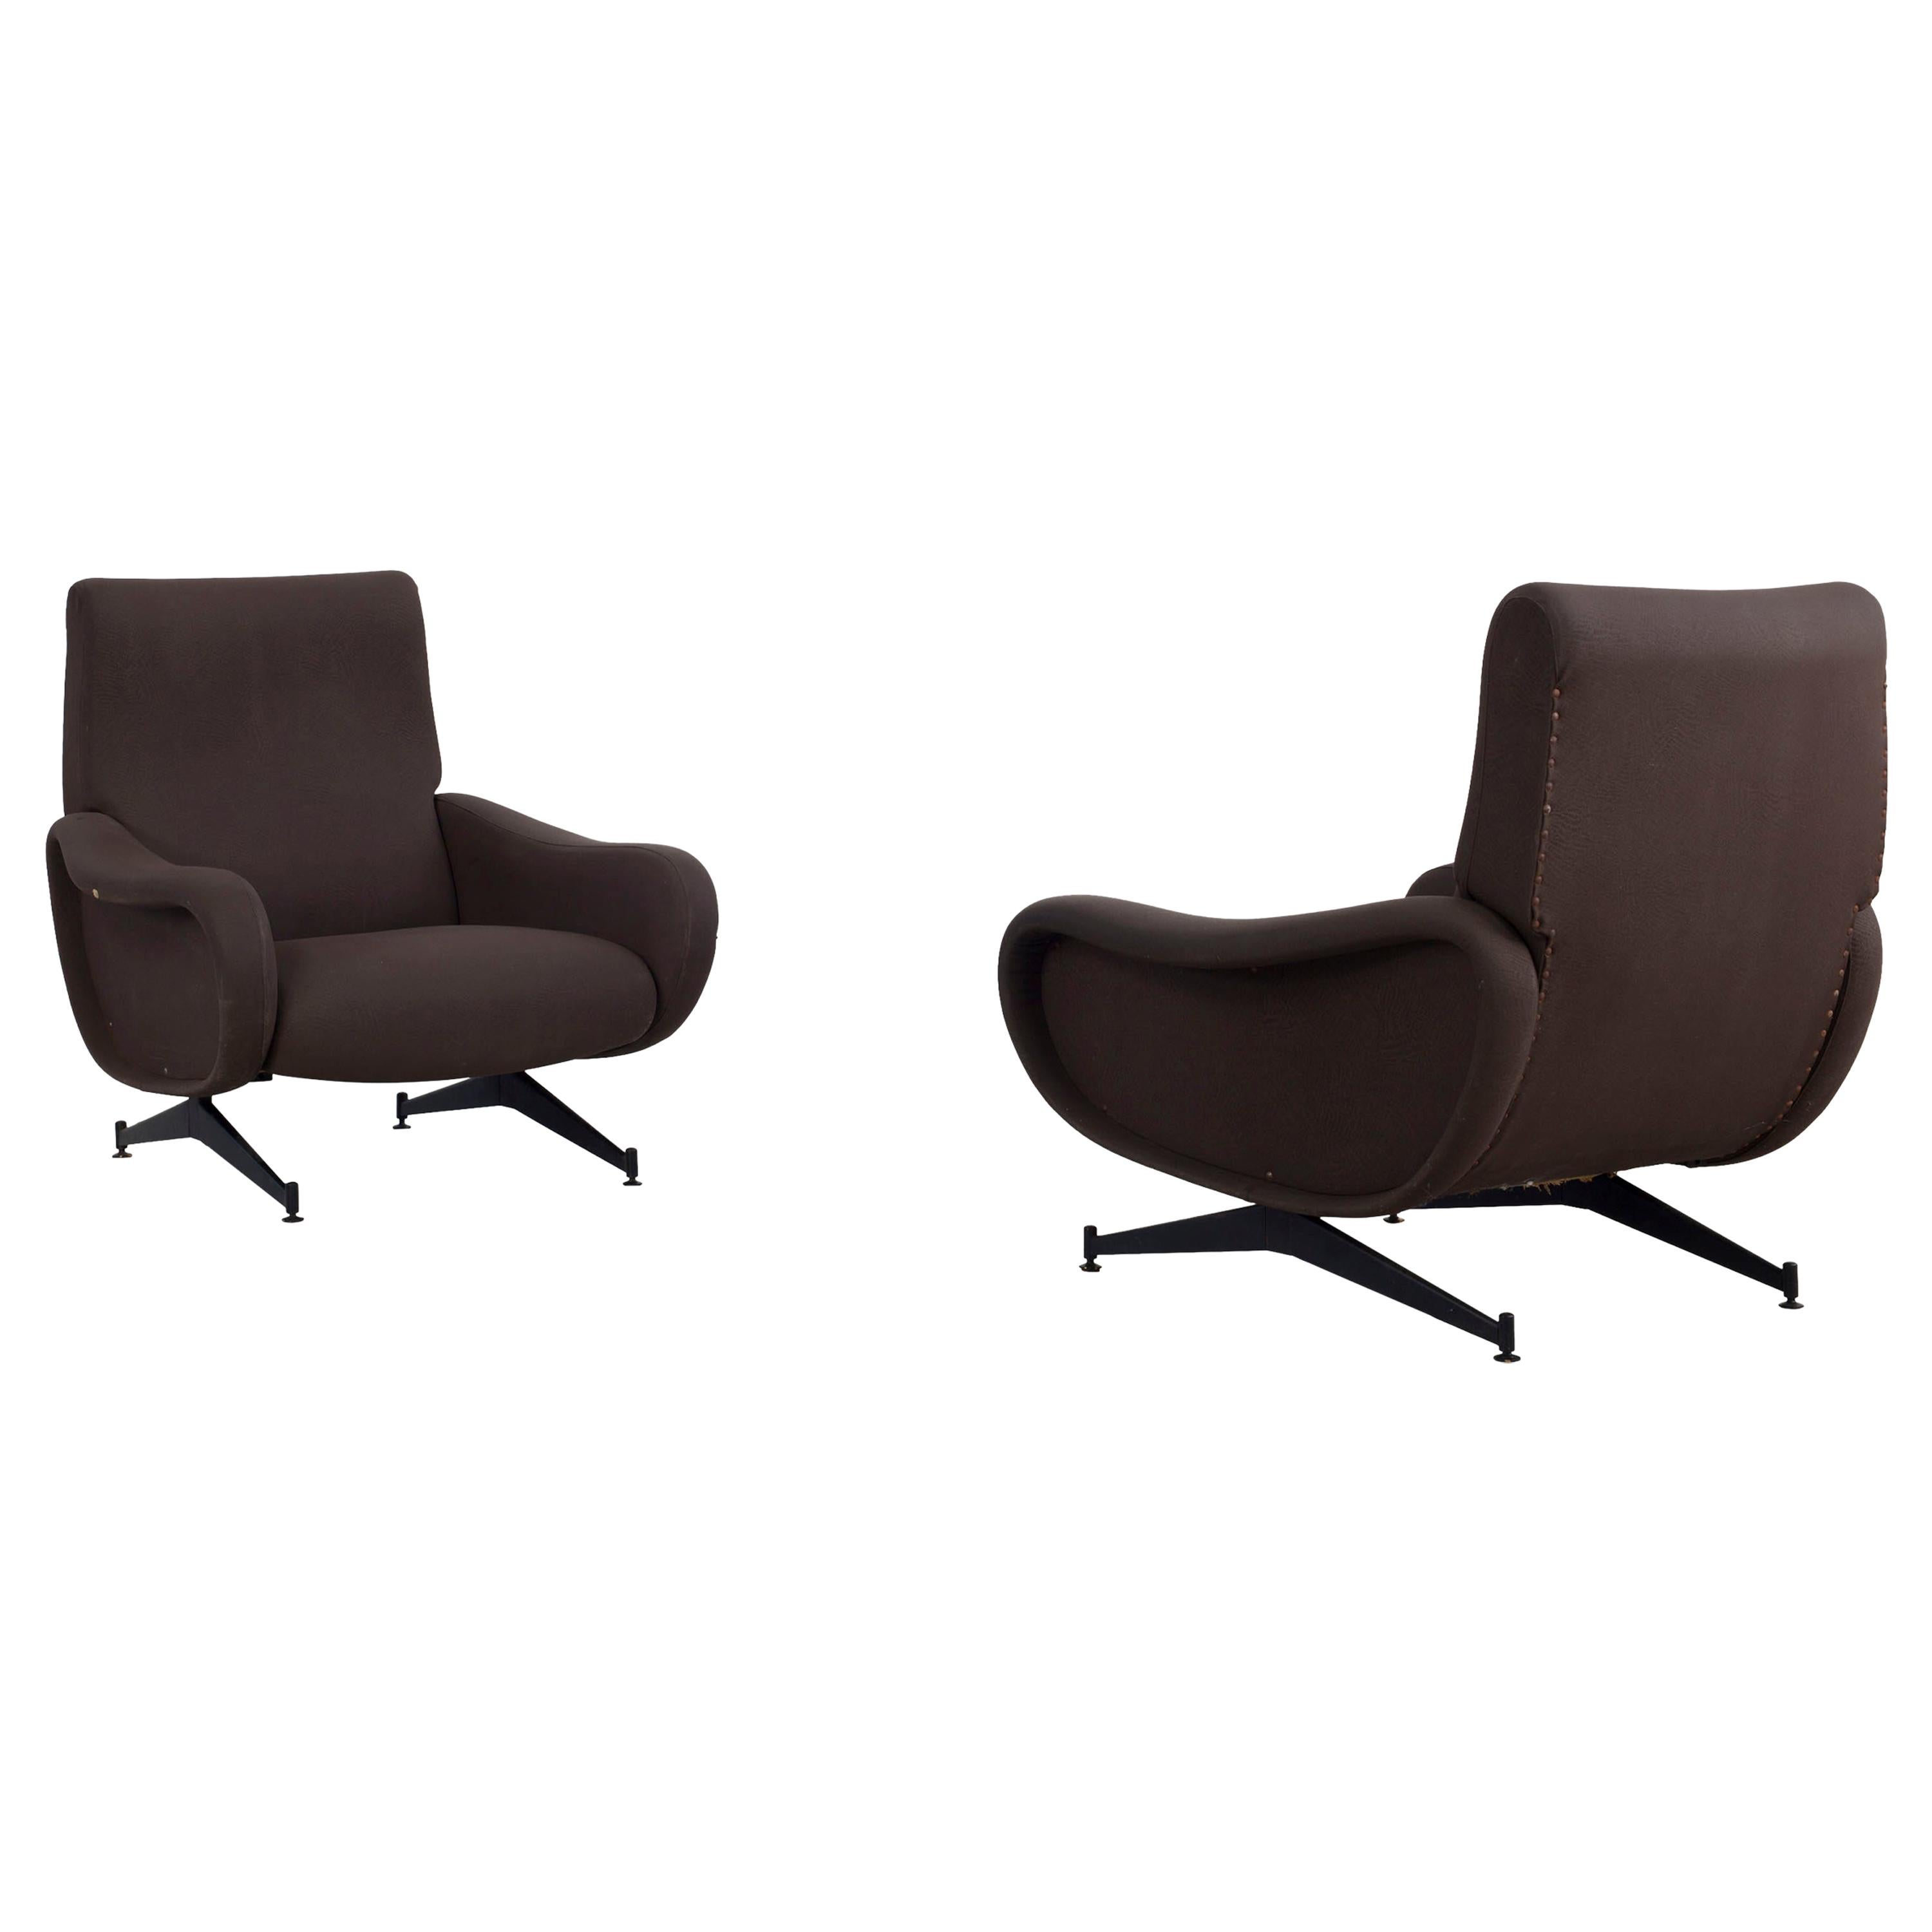 Set of Two Brown Armchairs in the Manner of Marco Zanuso, Ladychairs, Italy